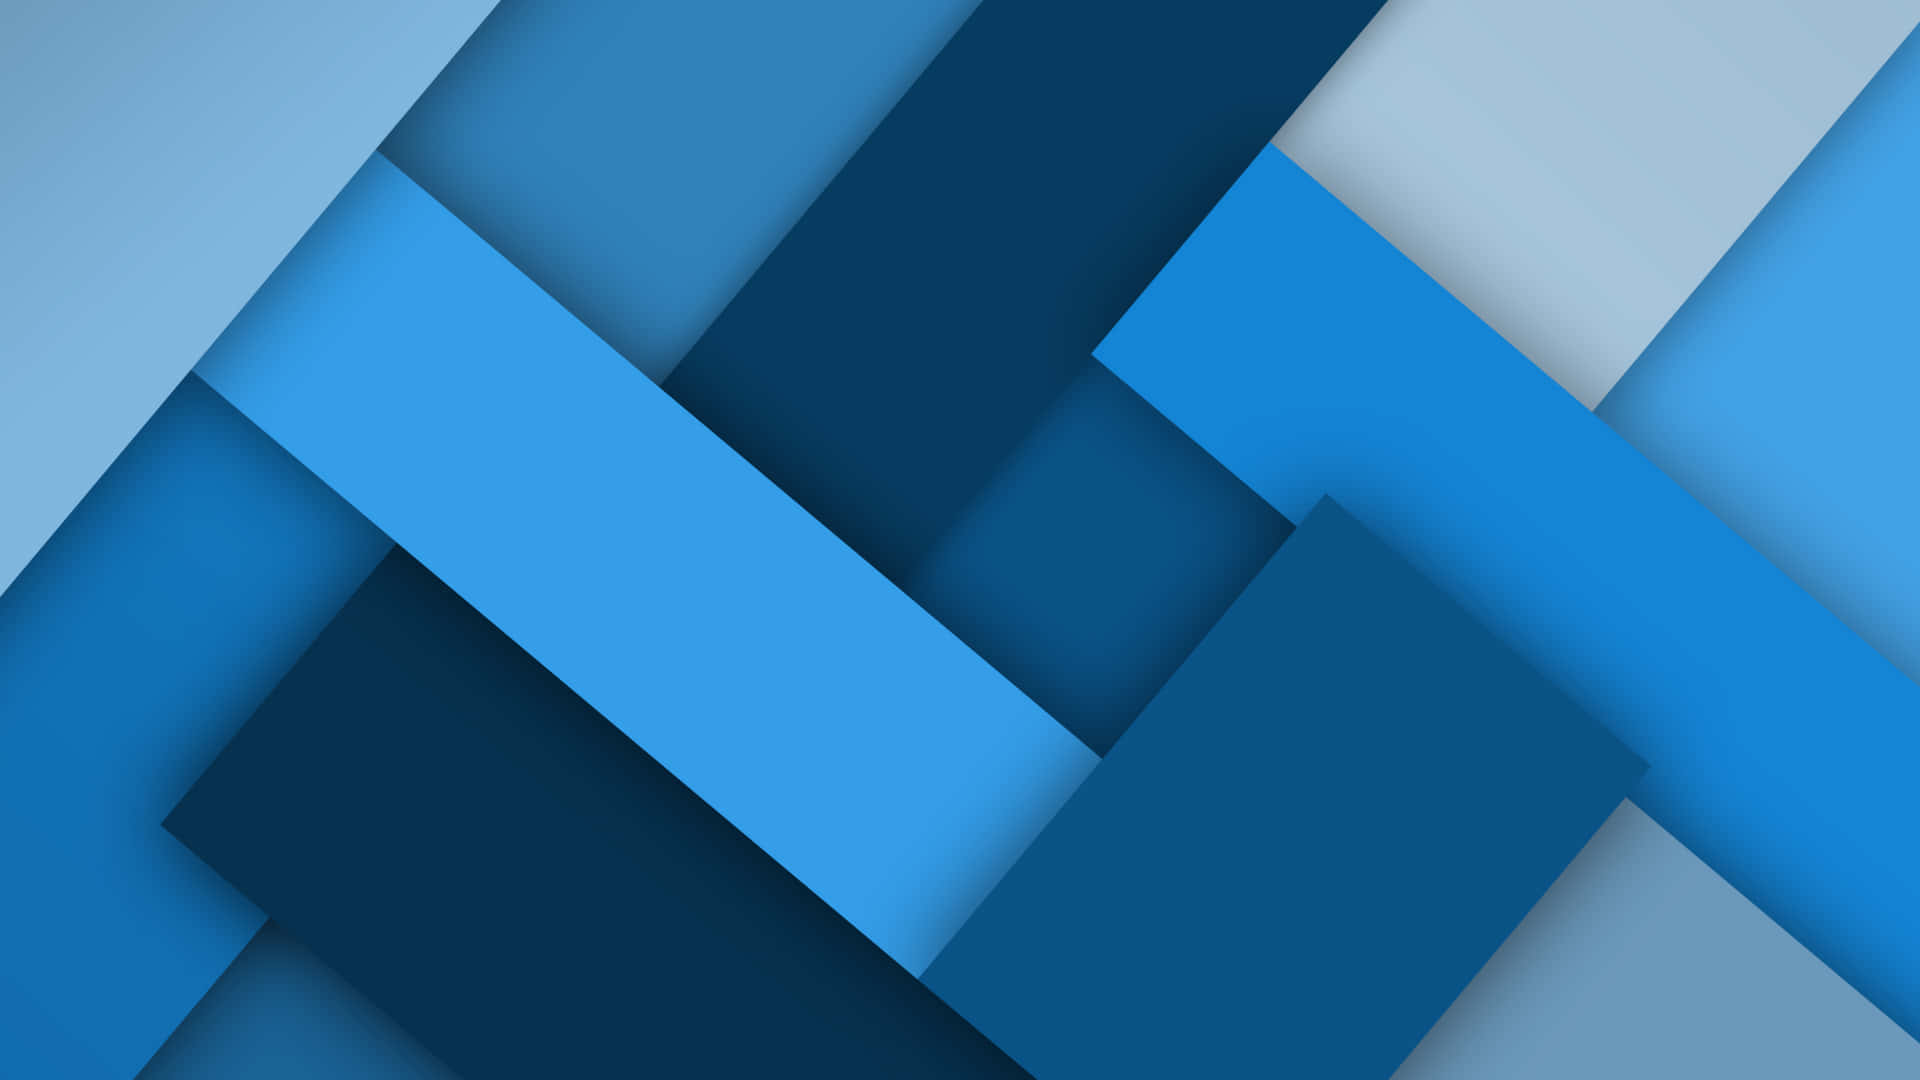 A Colorful Abstract Blue Design